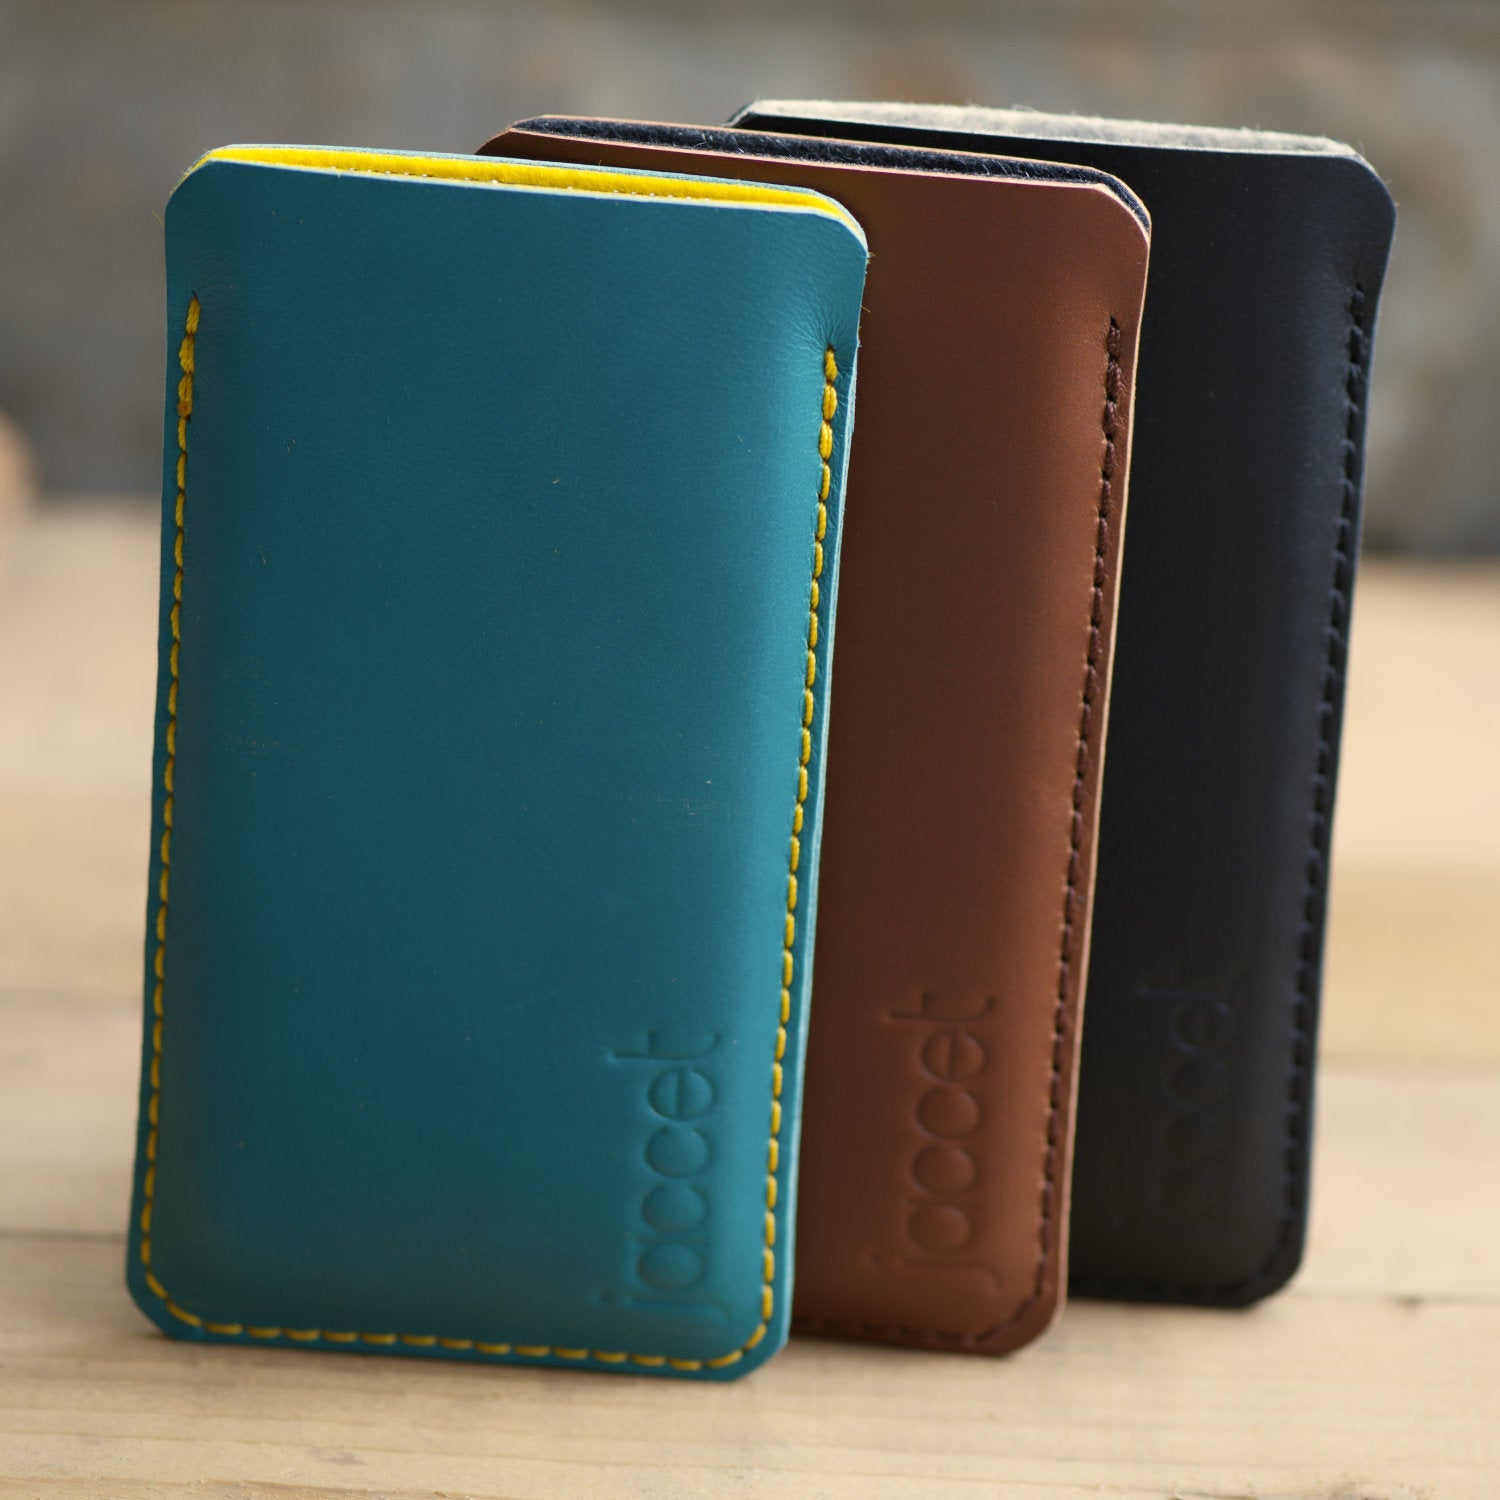 Full-grain leather Sony Xperia sleeve - Turquoise leather with yellow wolvilt - 100% handmade